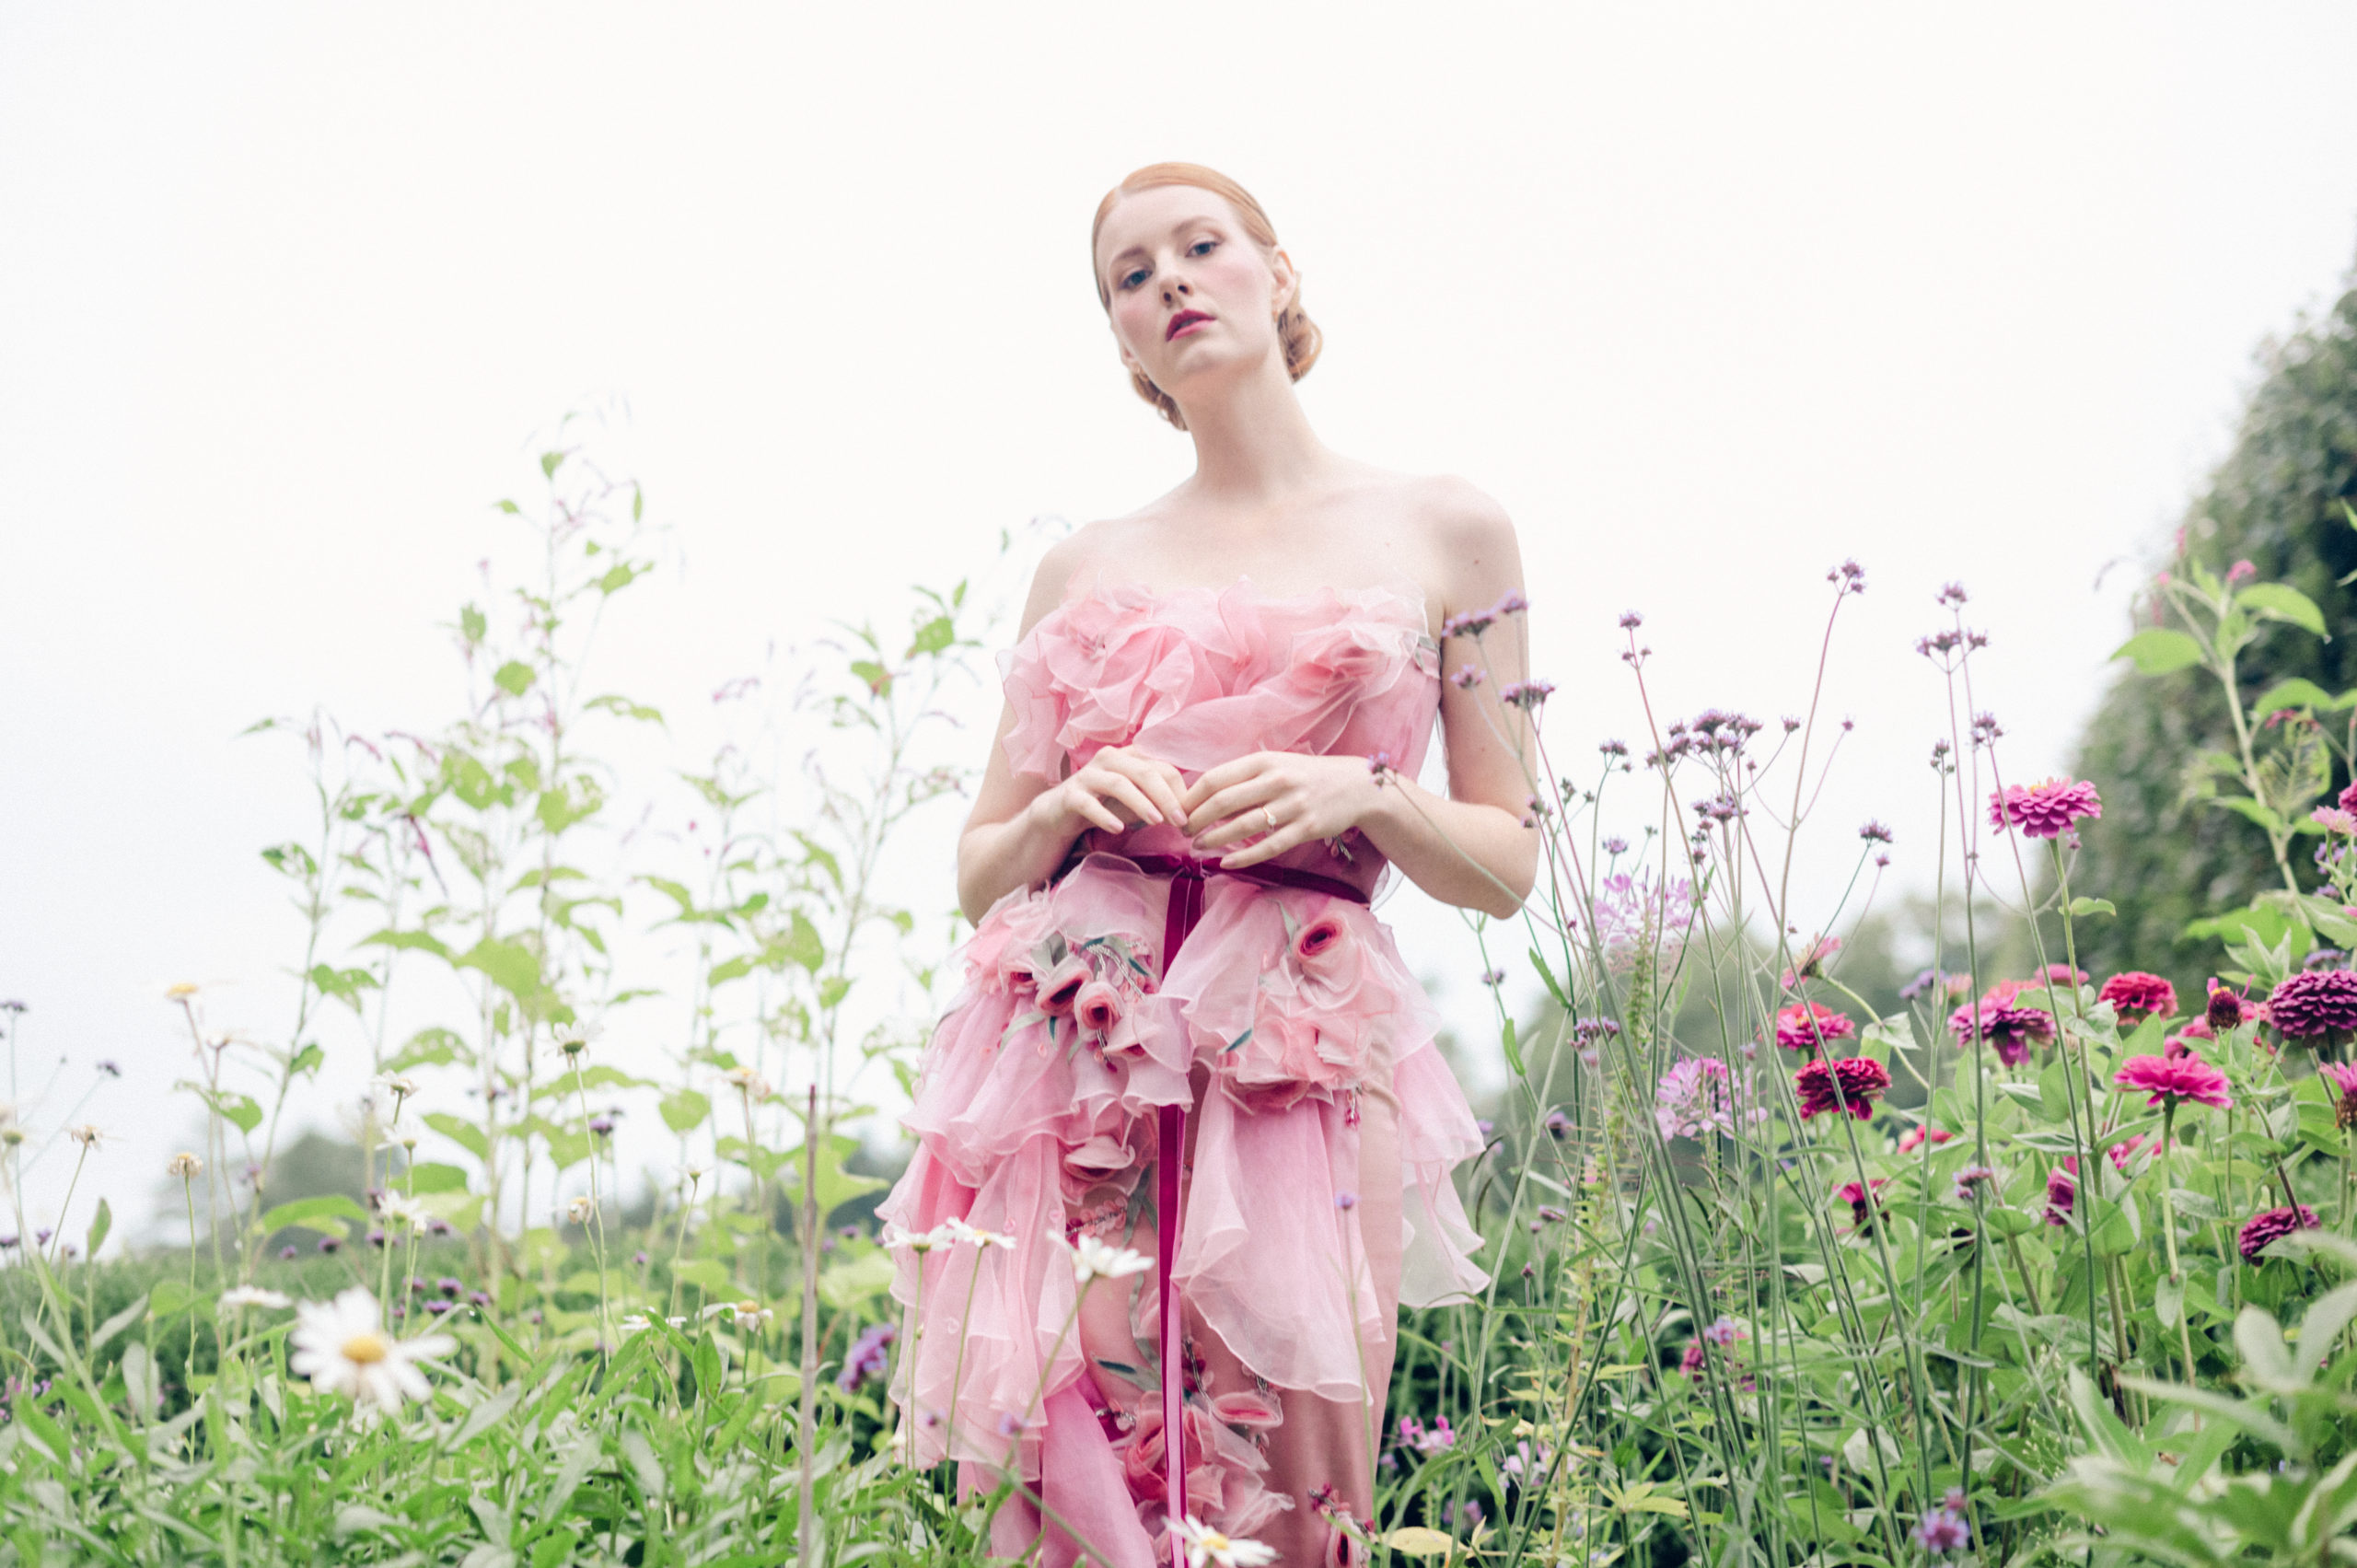 Model standing in a garden of flowers wearing a rare pink Marchesa gown.